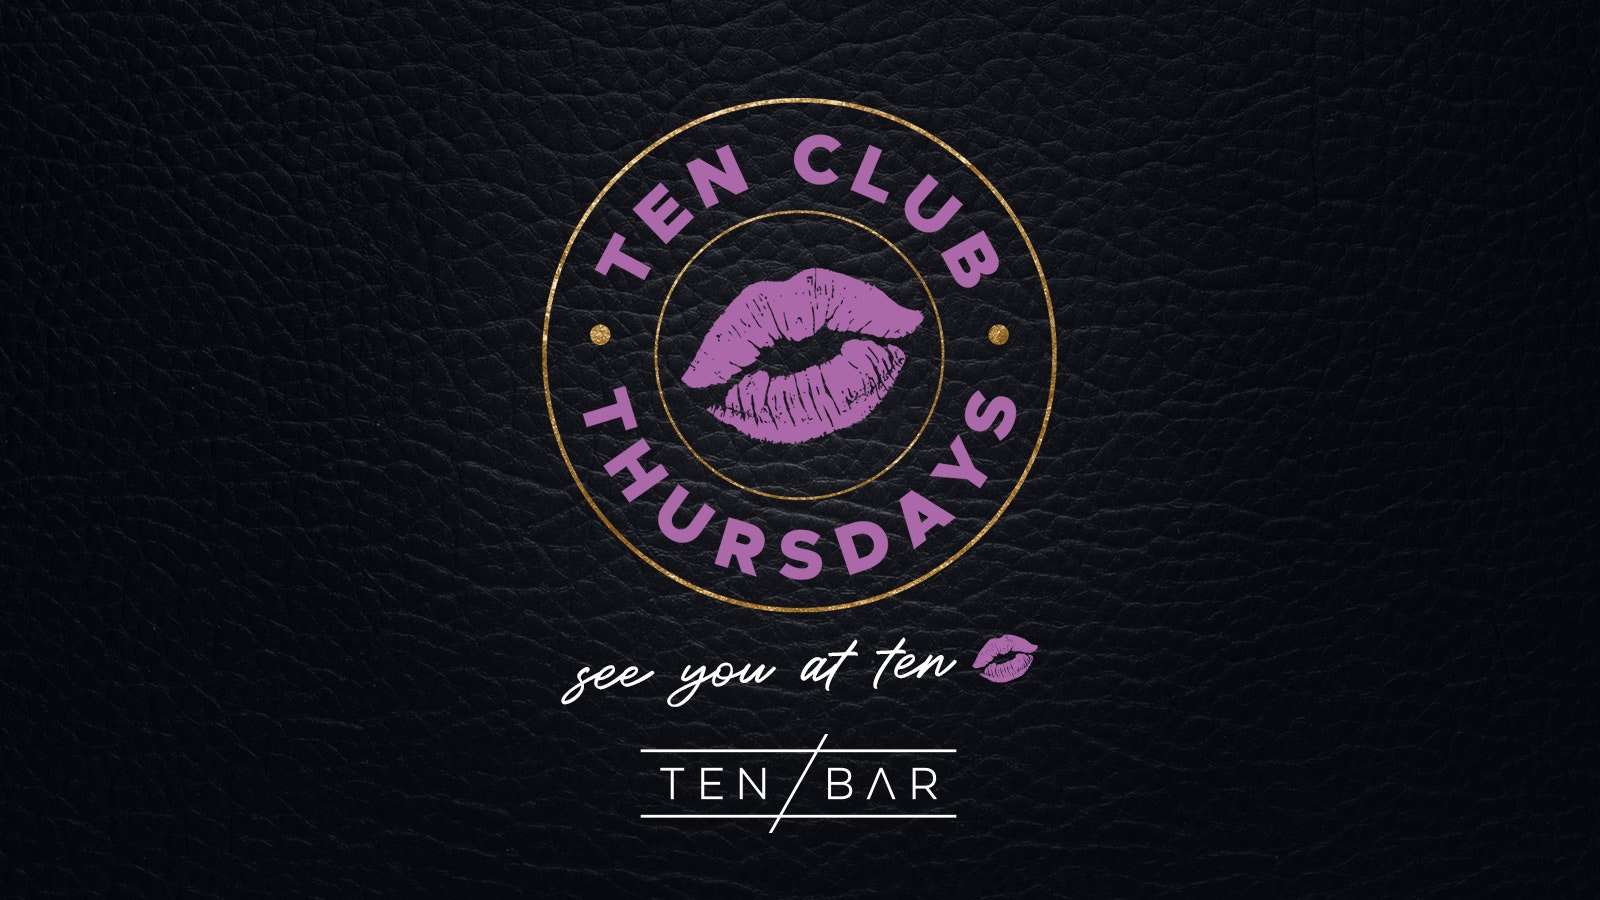 Ten Club Thursdays (Members Exclusive Drinks Deals Wristband) Free Entry all night long, Open from 9pm – 23rd November